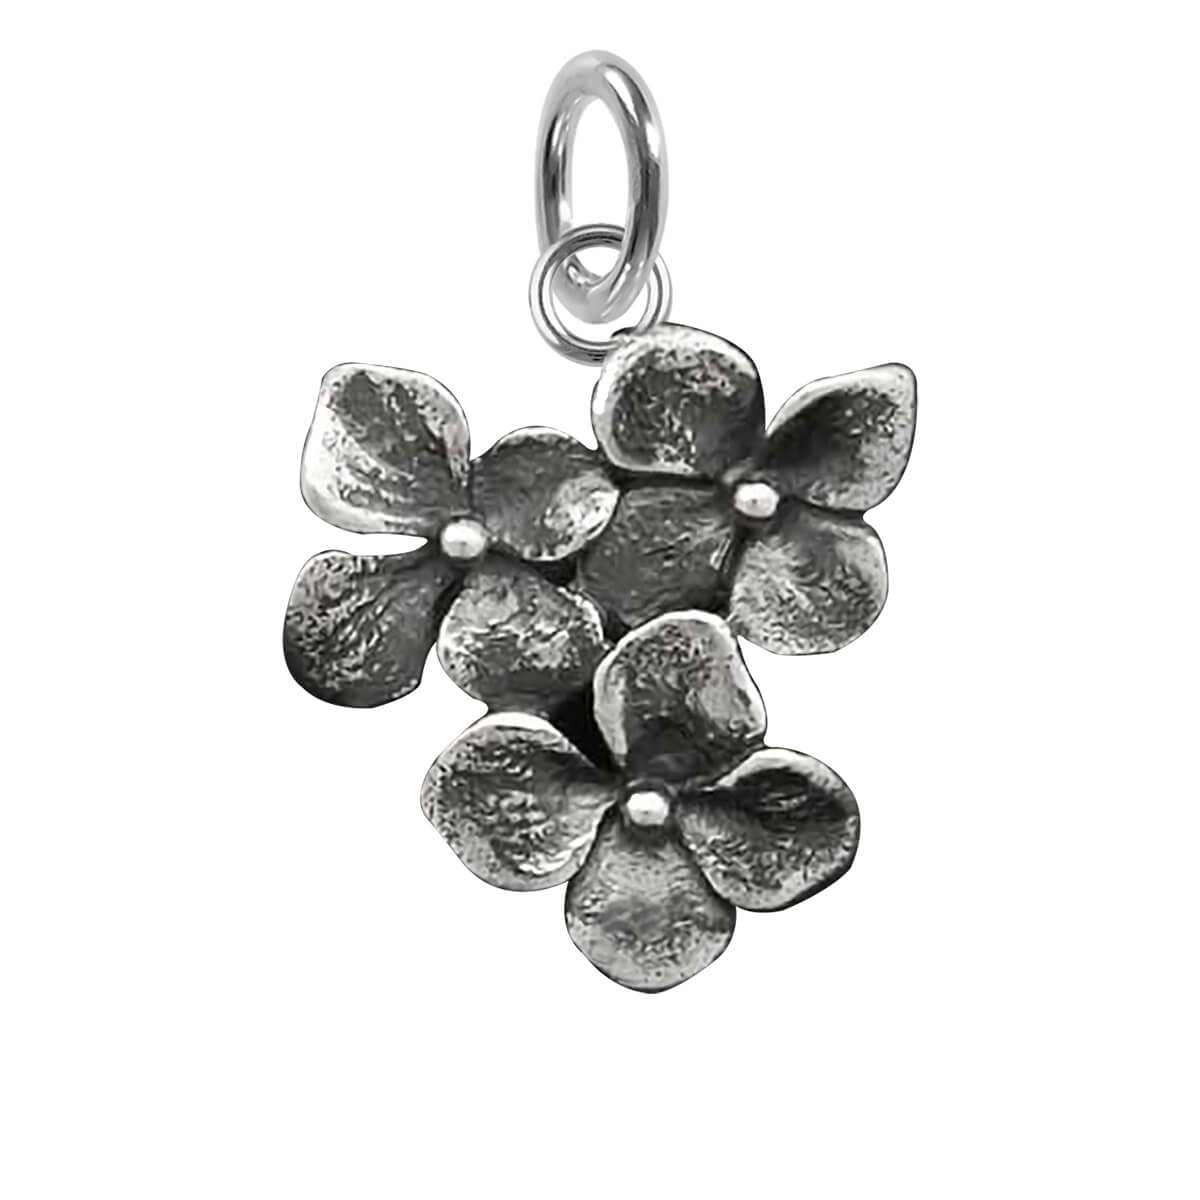 Hydrangea blooms charm sterling silver floral pendant